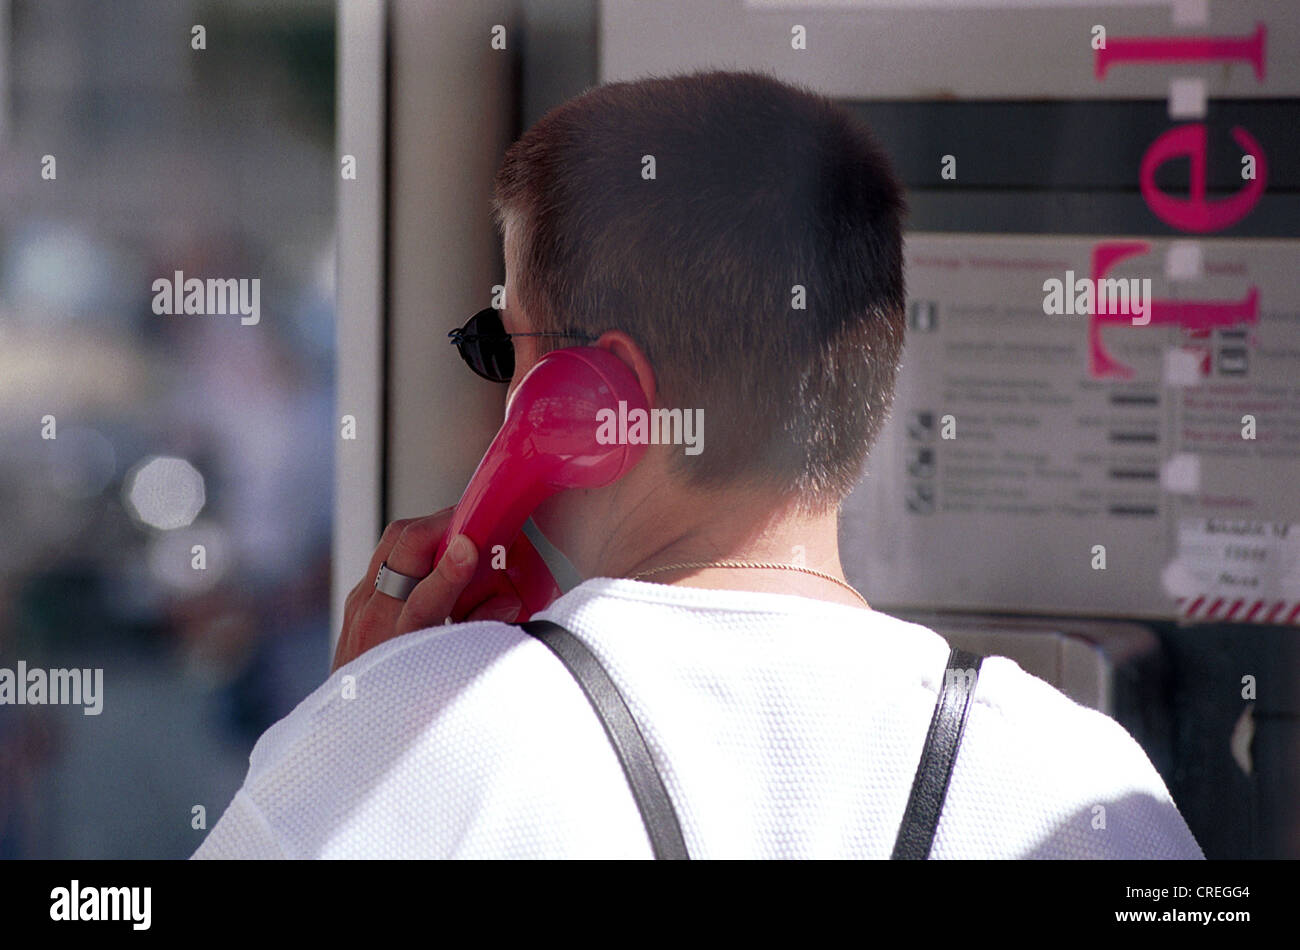 Woman in phone booth, Herne, Germany Stock Photo